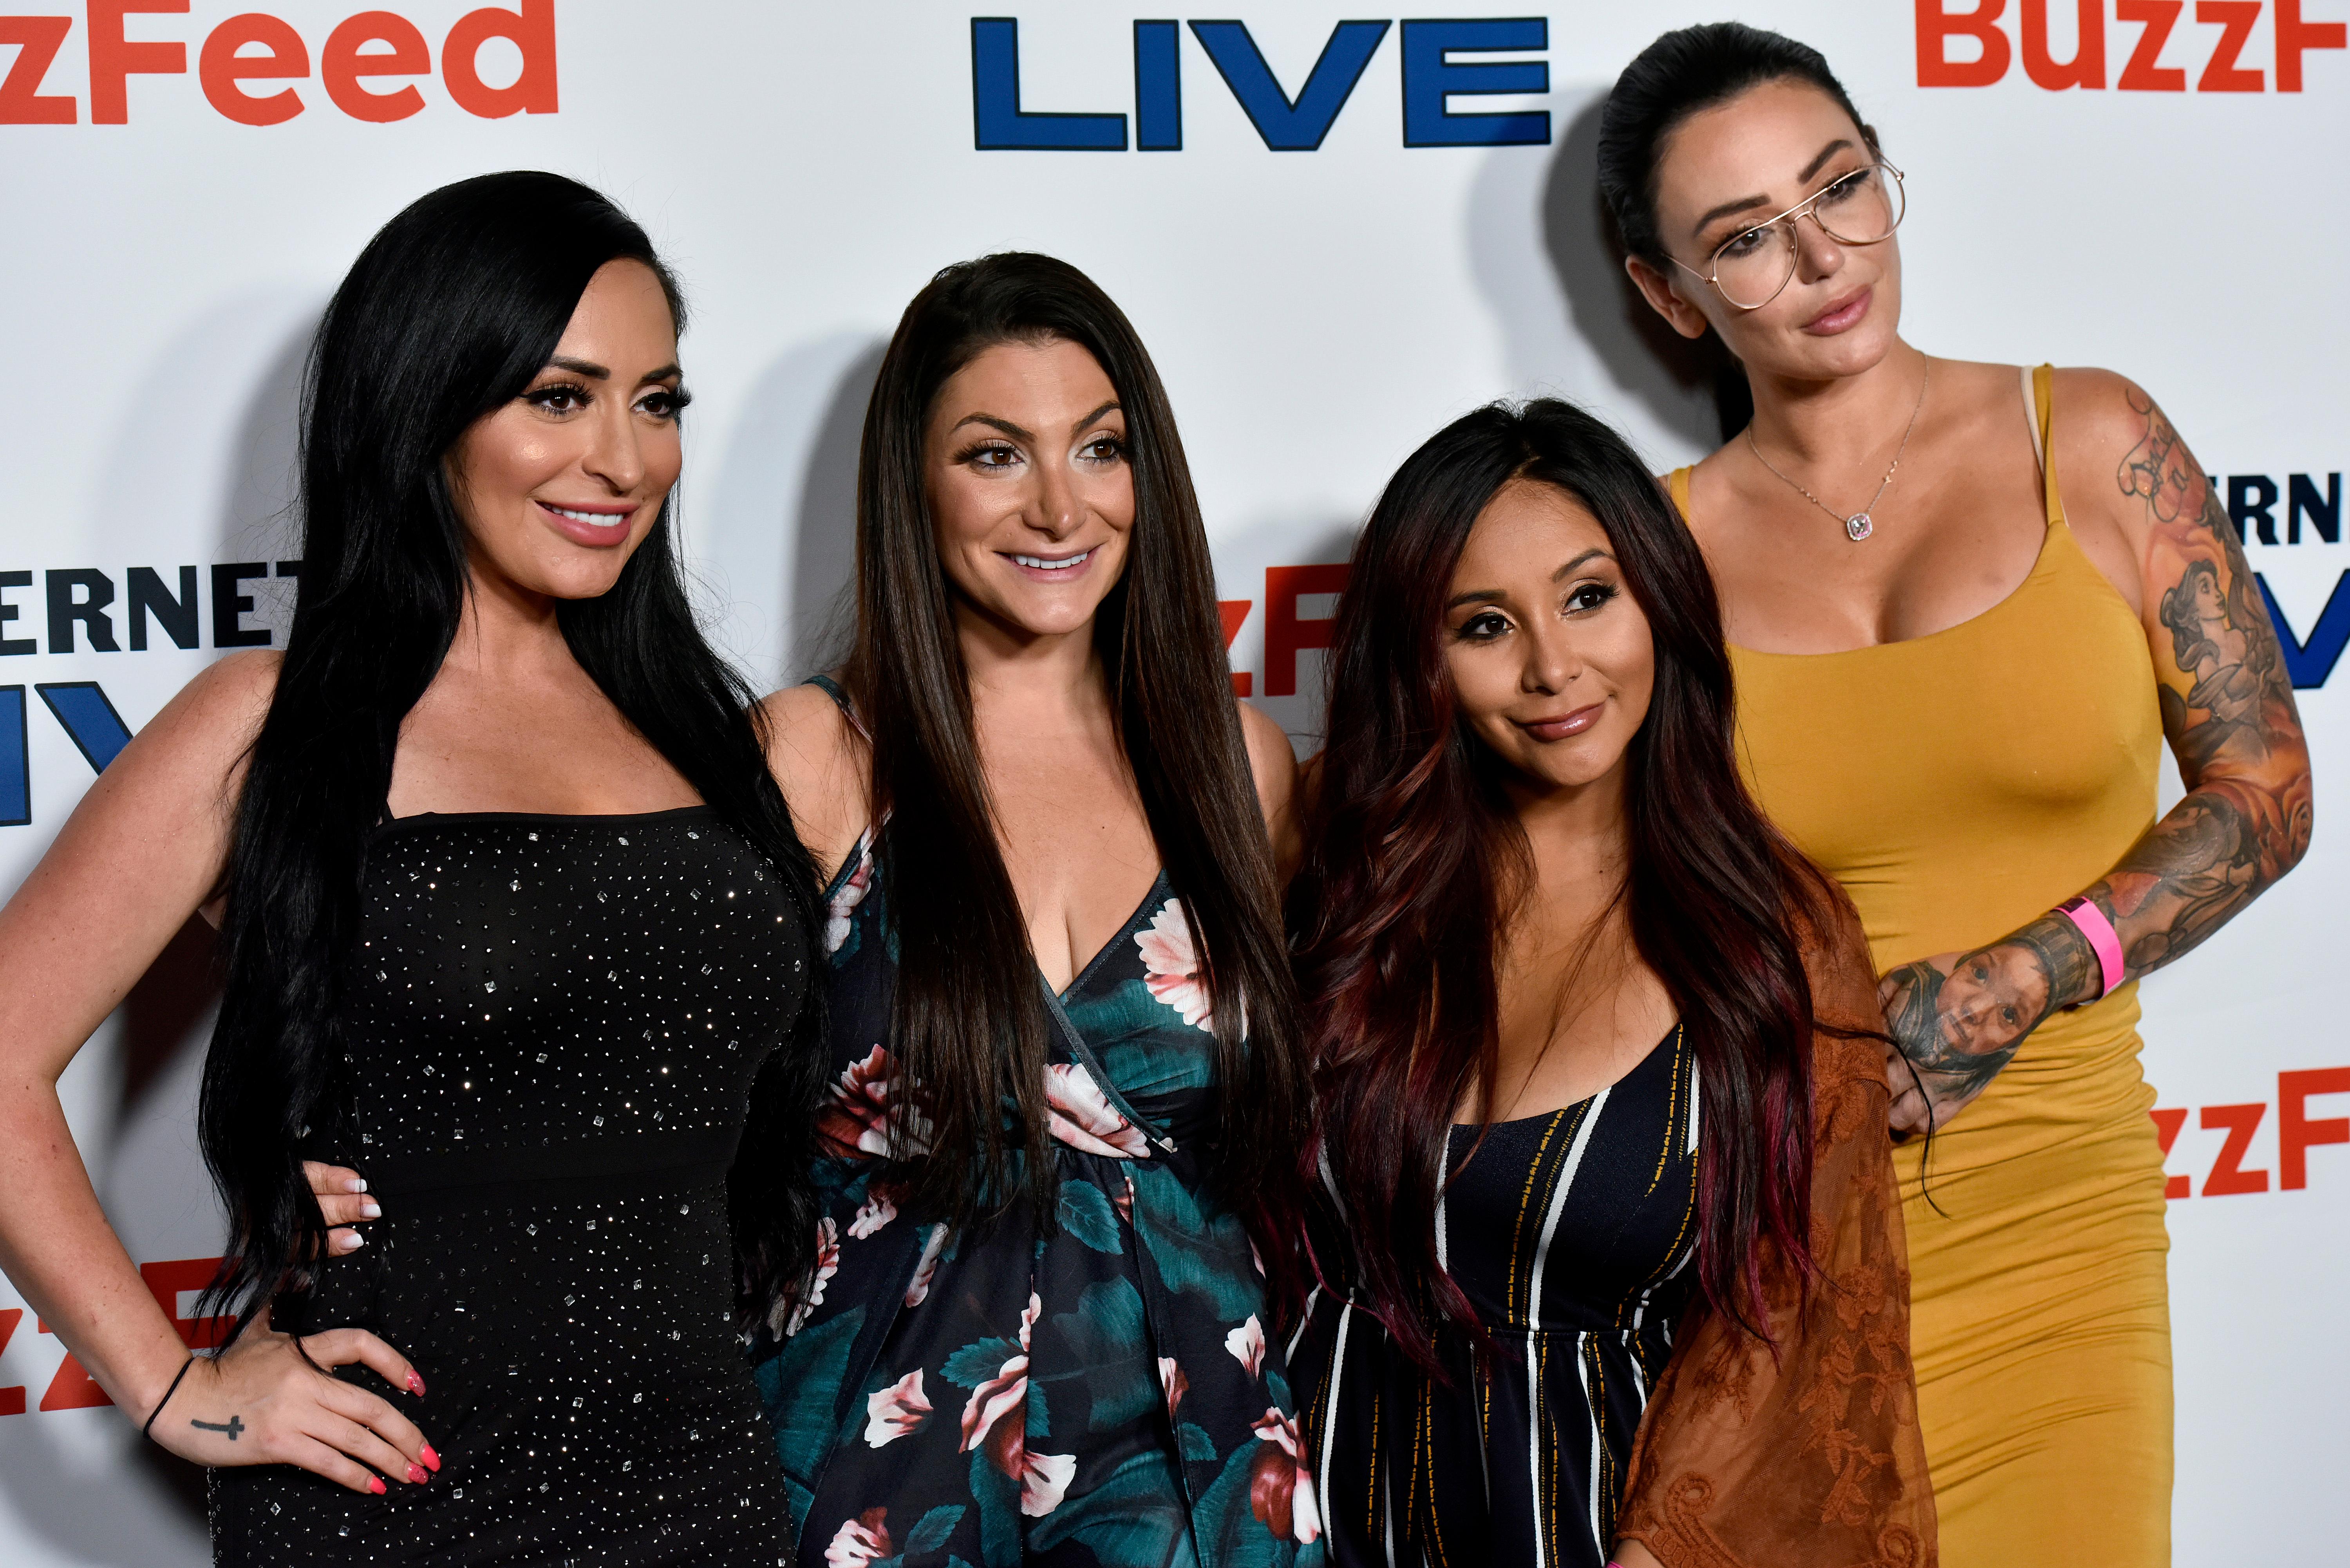 ‘Jersey Shore’ Star JWoww Slams Show And Co-Star Feels ‘Disrespected’ And ‘Hurt’